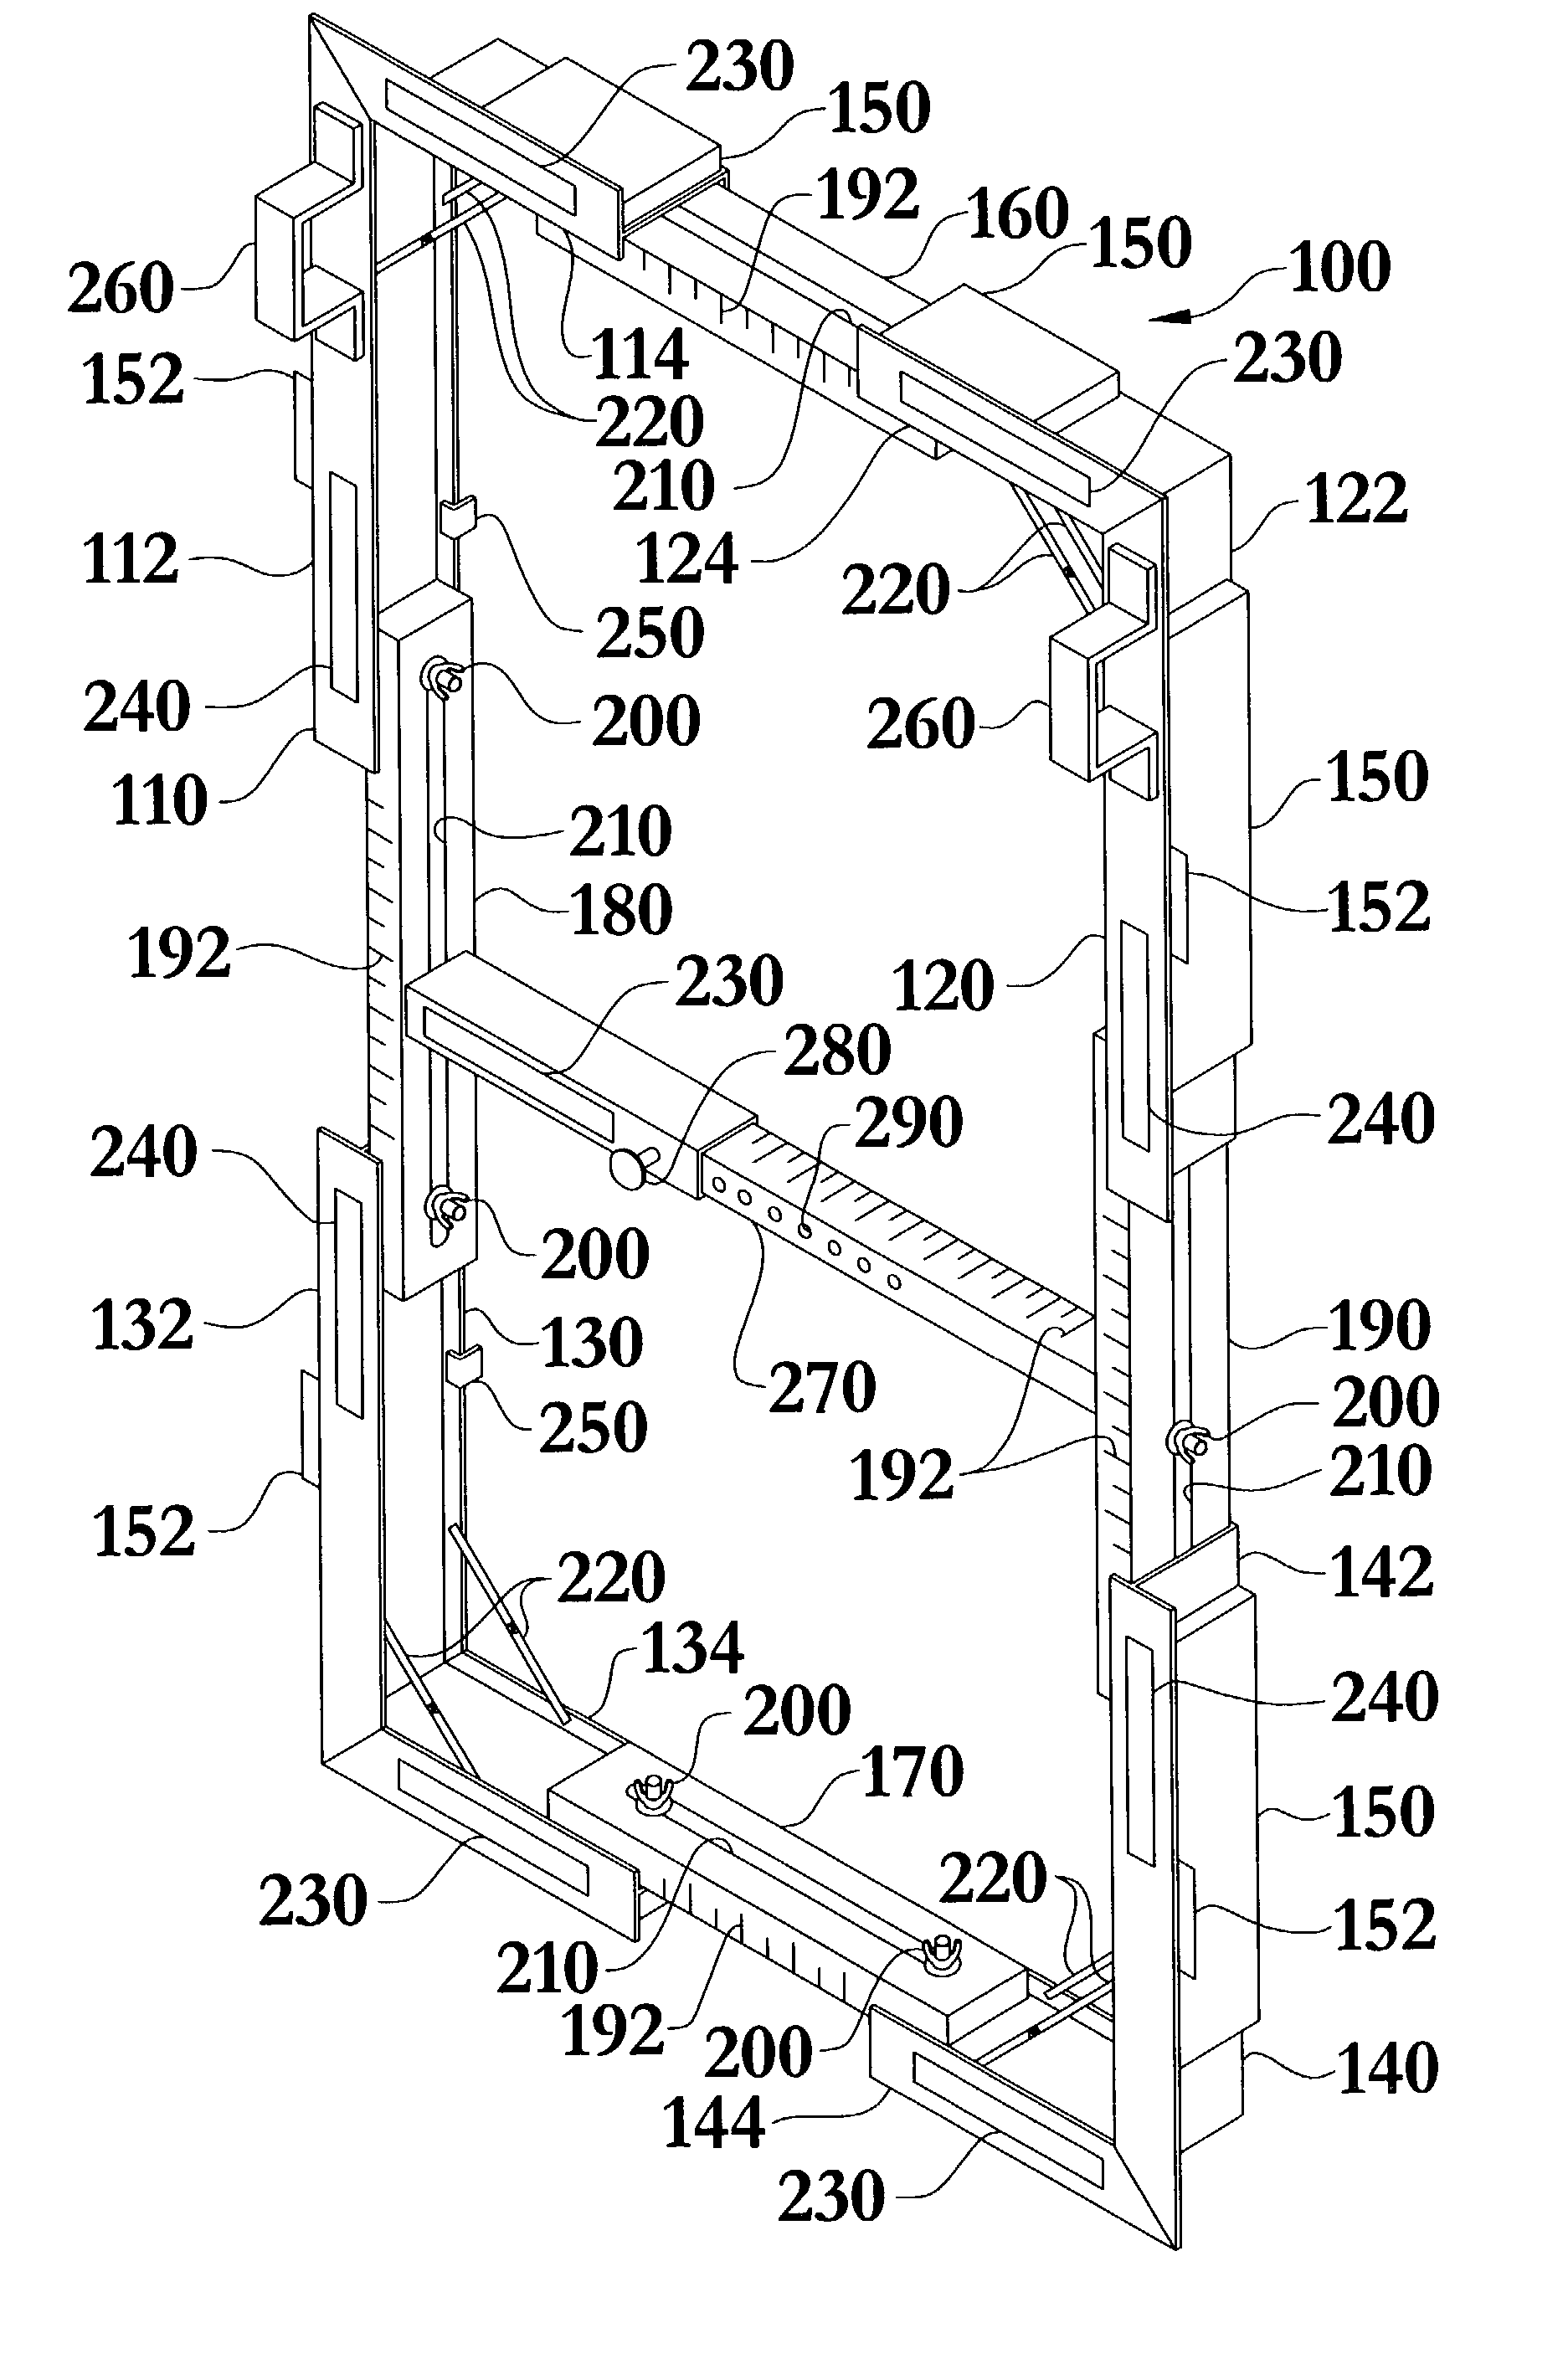 Apparatus for installing a frame and related appurtenances